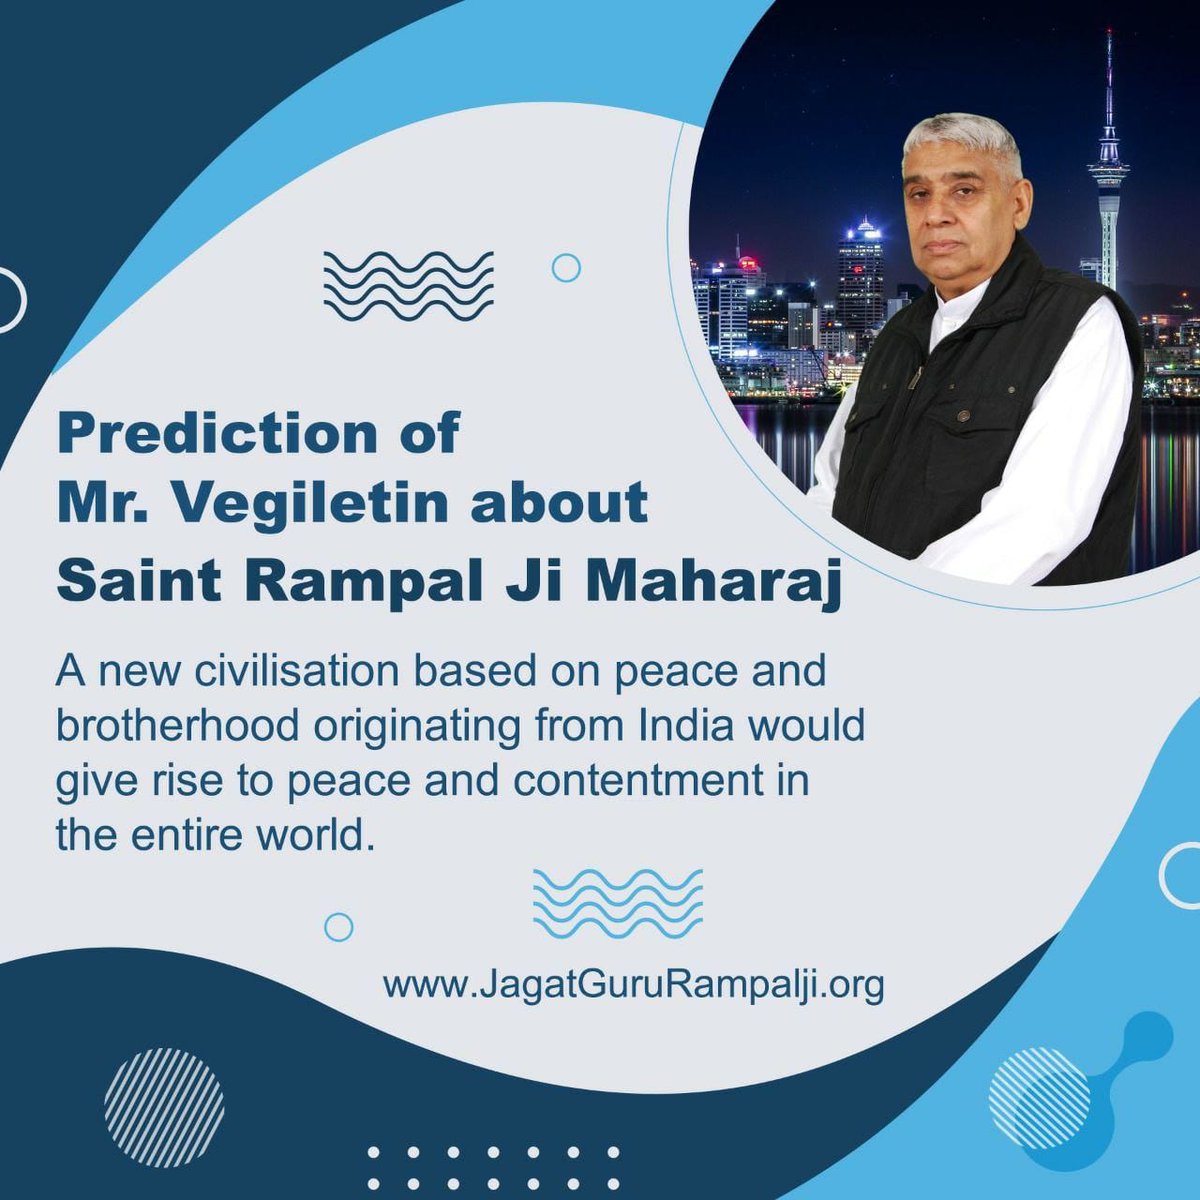 #GodMorningThursday
 According to Prediction of Mr. Vegiletin about Saint Rampal Ji Maharaj, 
A new civilisation based on peace and brotherhood originating from India would give rise to peace and contentment in the entire world.
#SaintRampalJiQuotes